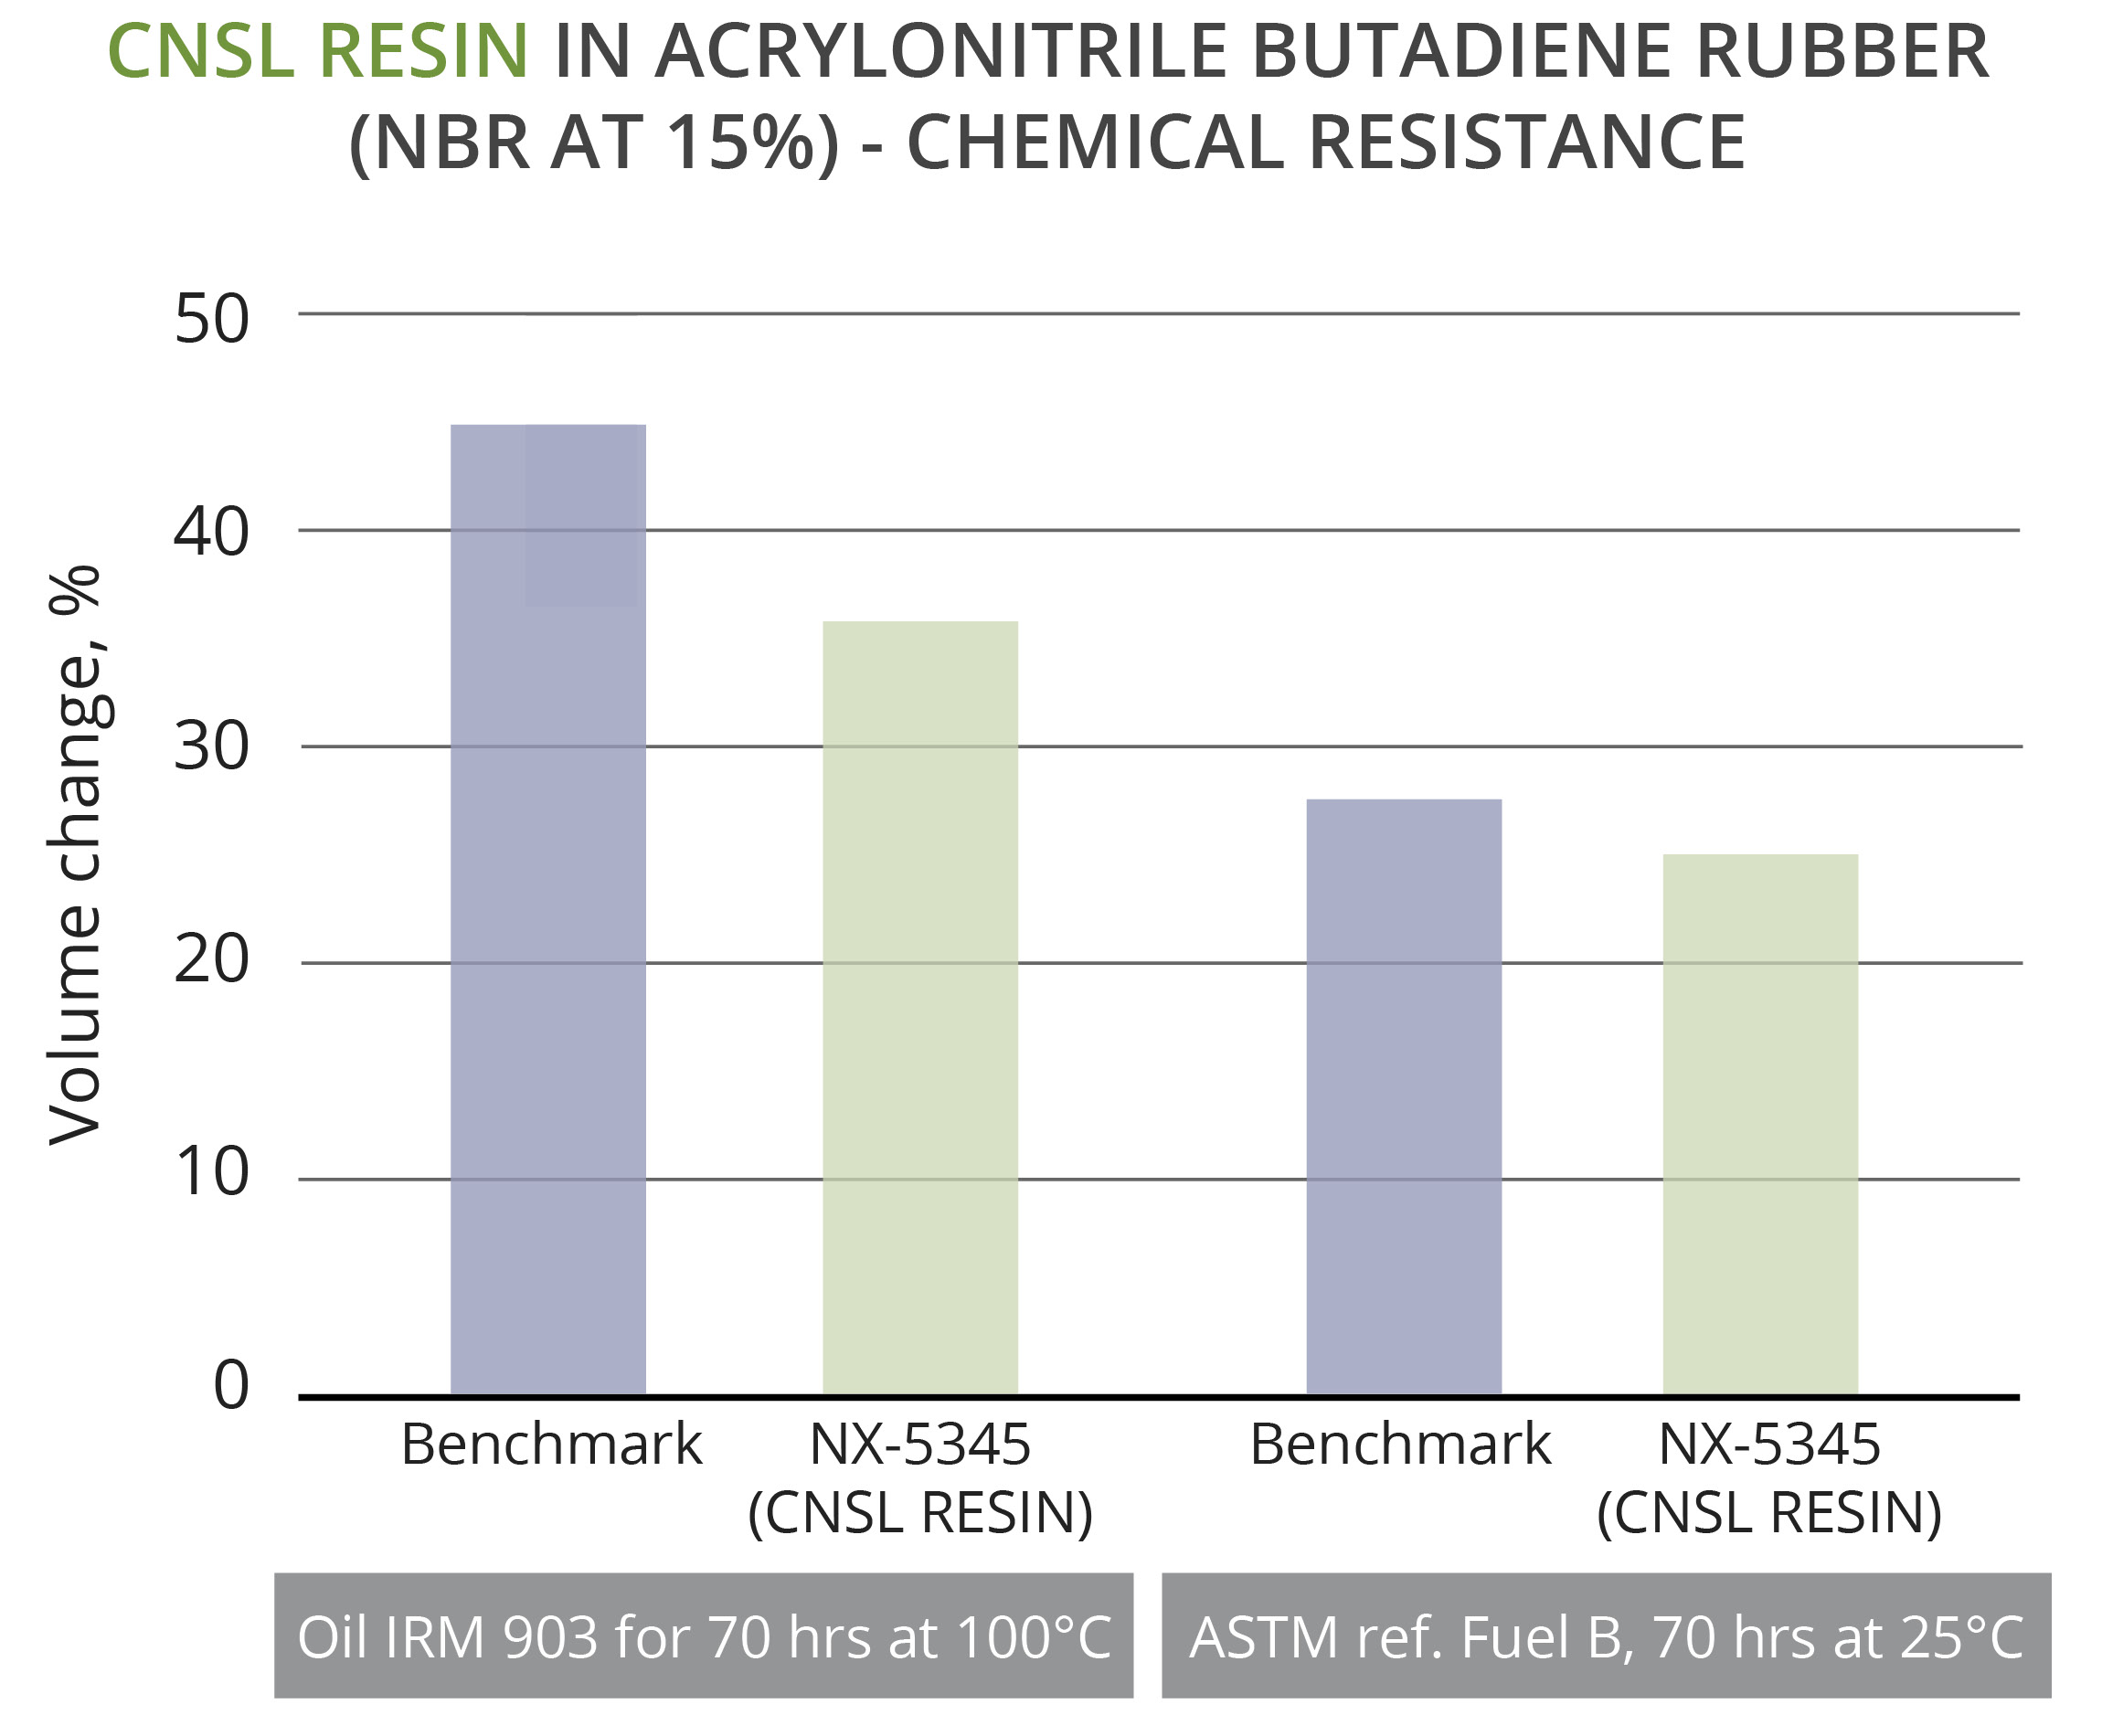 CNSL Resins are used as plasticizers in nitrile butadiene rubber providing good resistance to fuels and oils